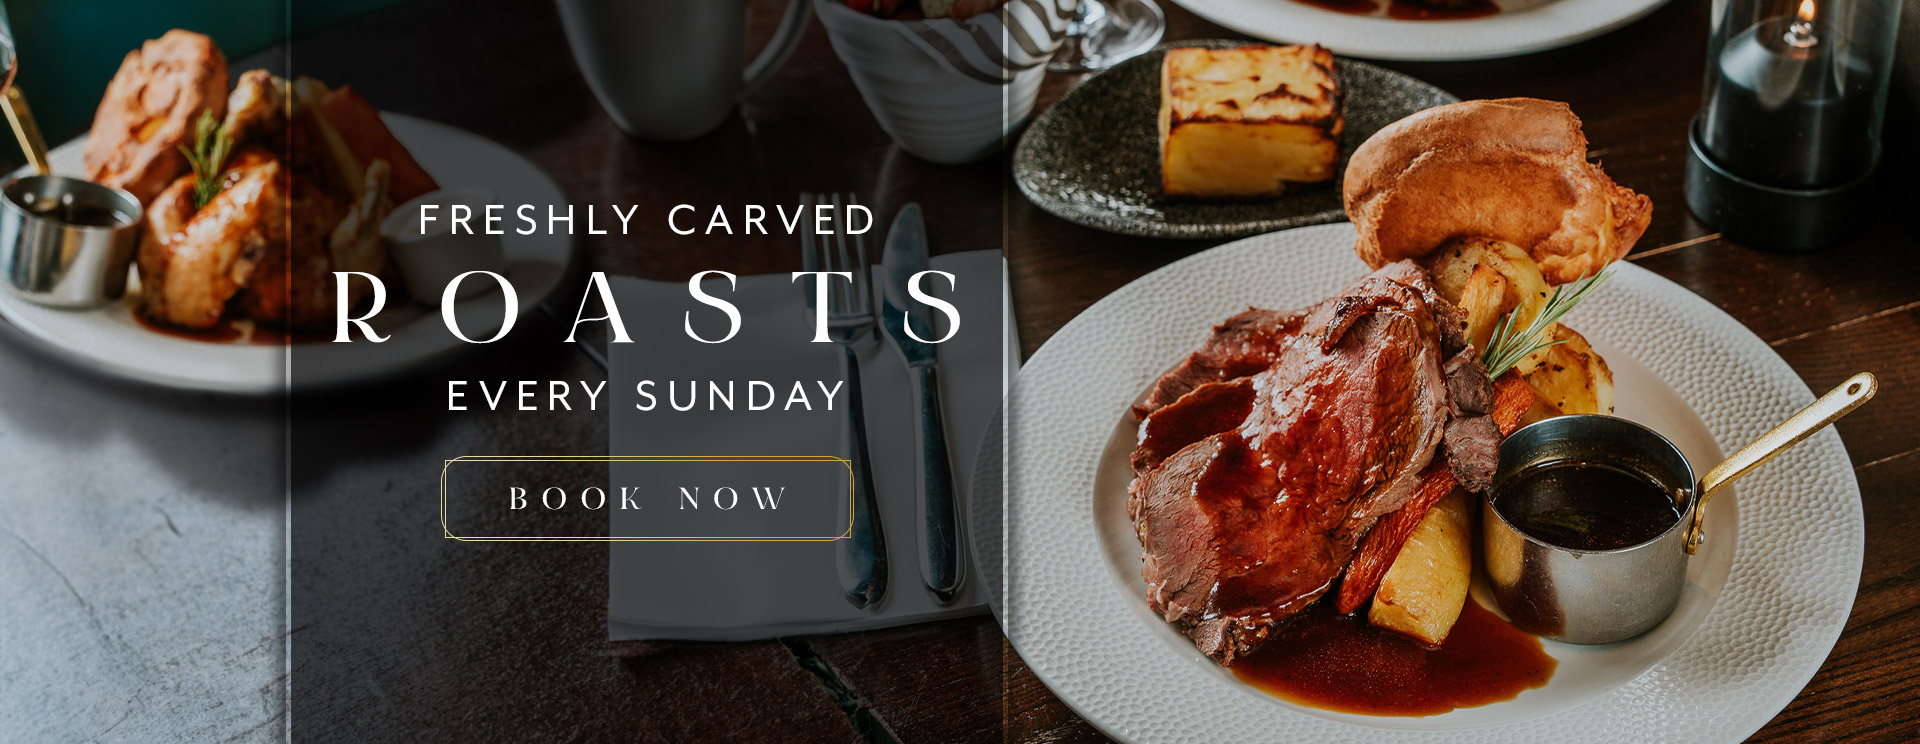 Sunday Lunch at The Horse & Groom